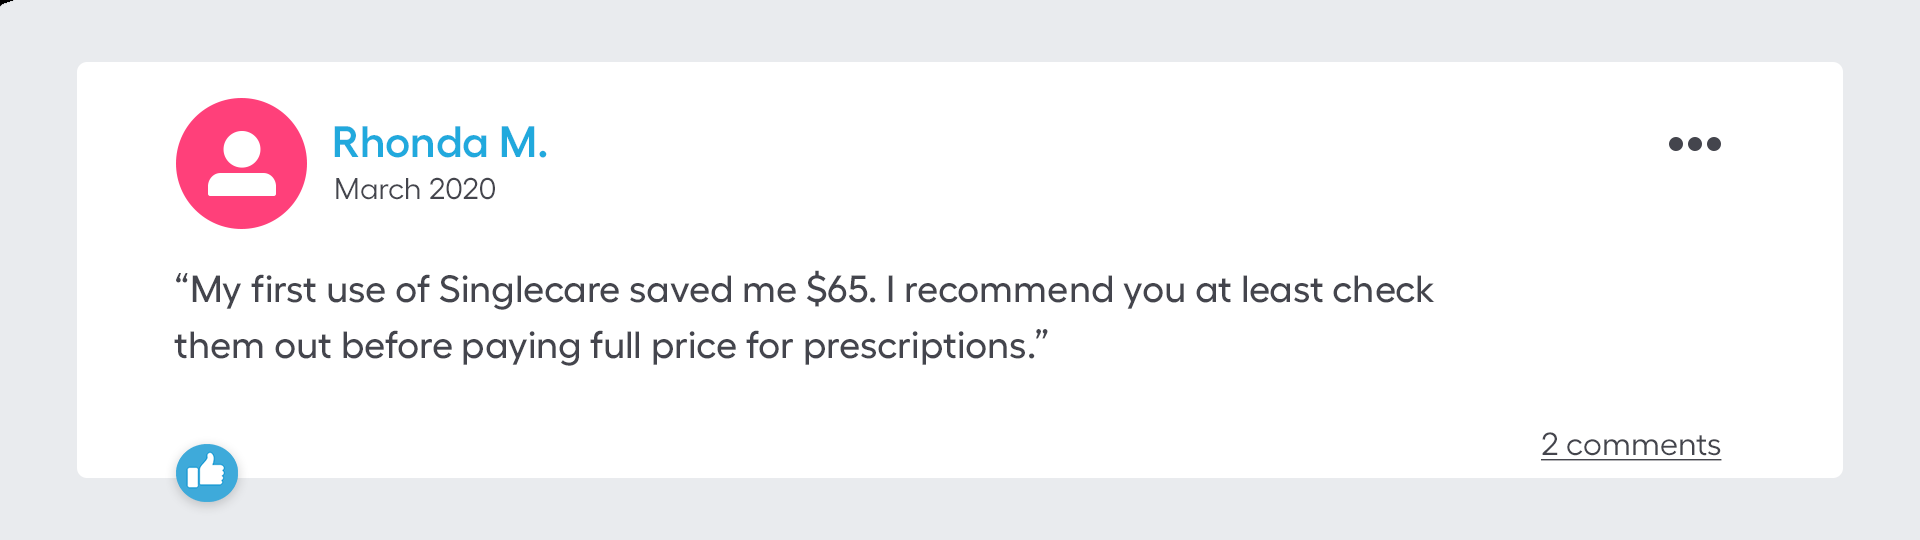 My first use of SingleCare saved me $65. I recommend you at least check them out before paying full price for prescriptions.